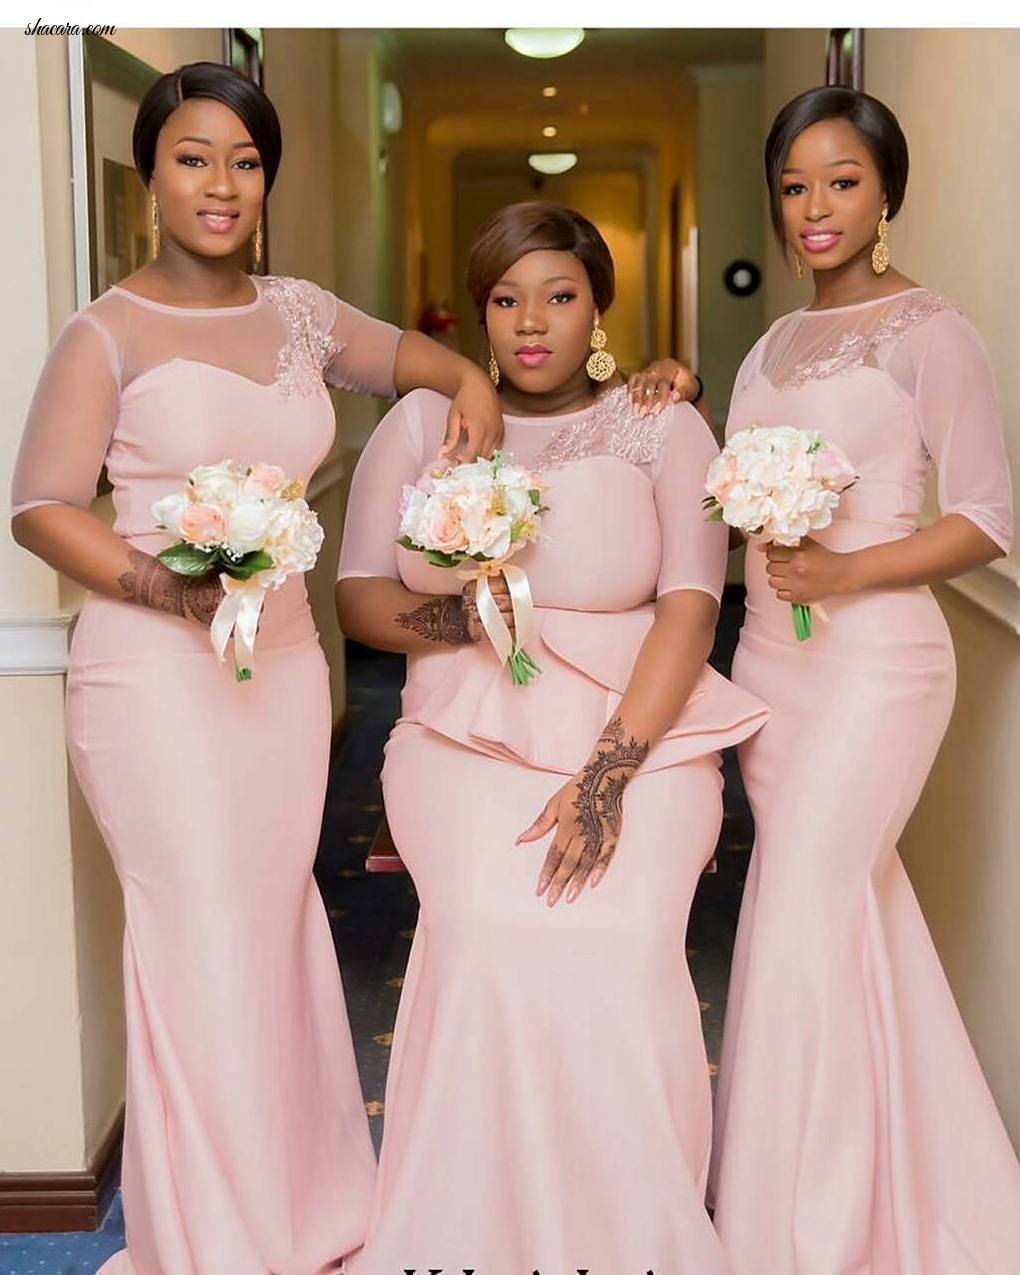 THE FABULOUS BRIDESMAID DRESSES WE ARE CRUSHING ON THIS WEEK